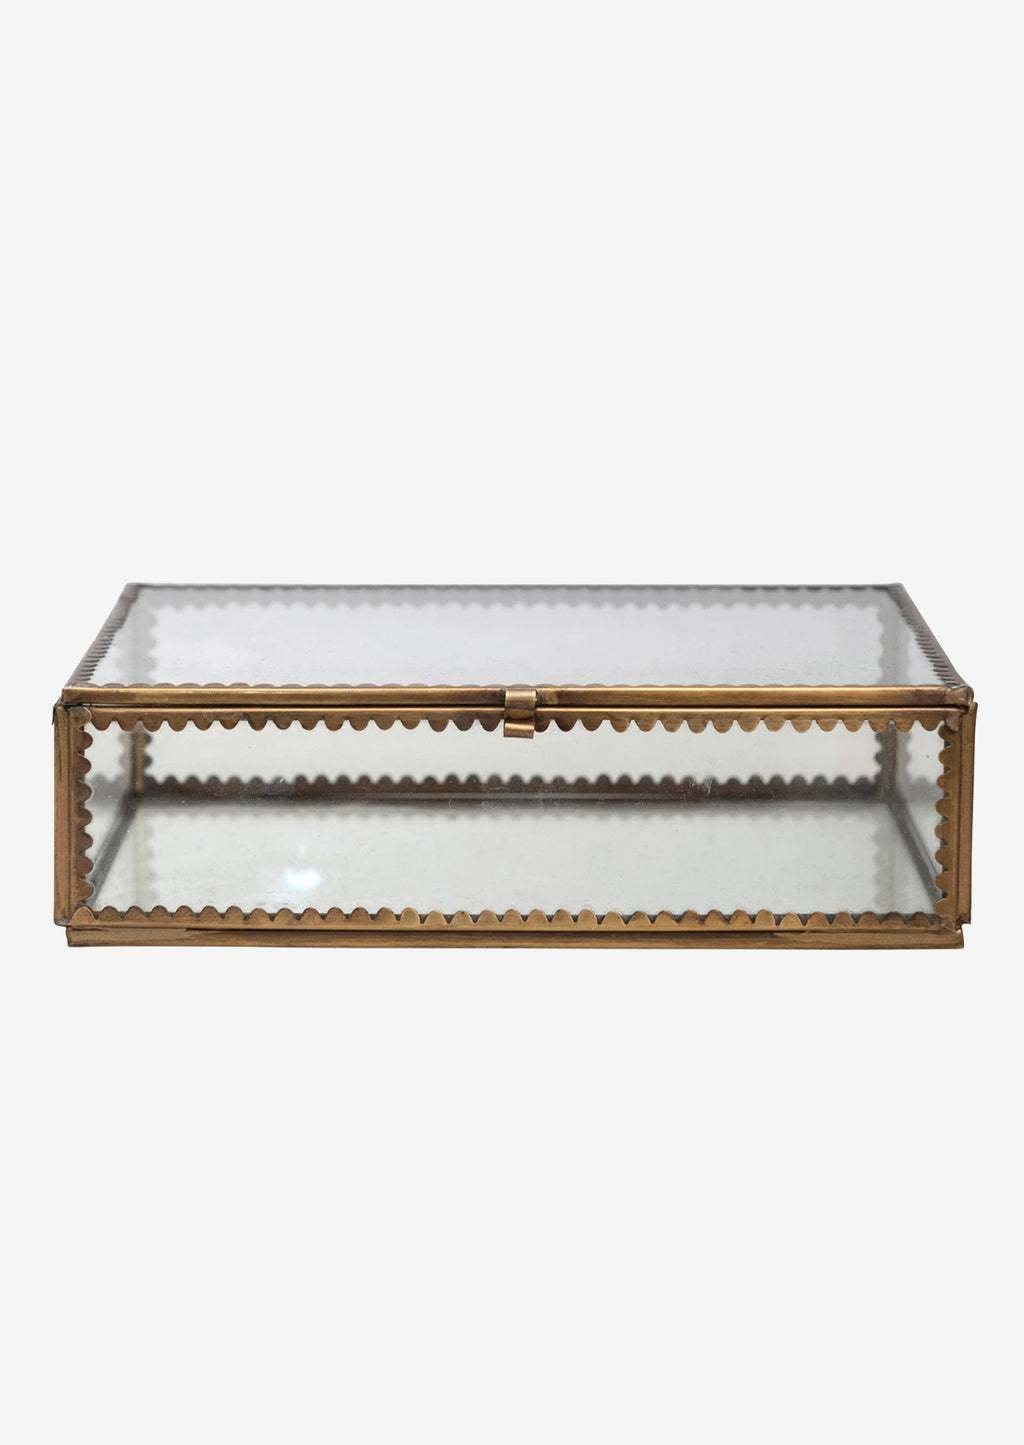 Large: Clear glass boxes with scalloped brass decorative trim.